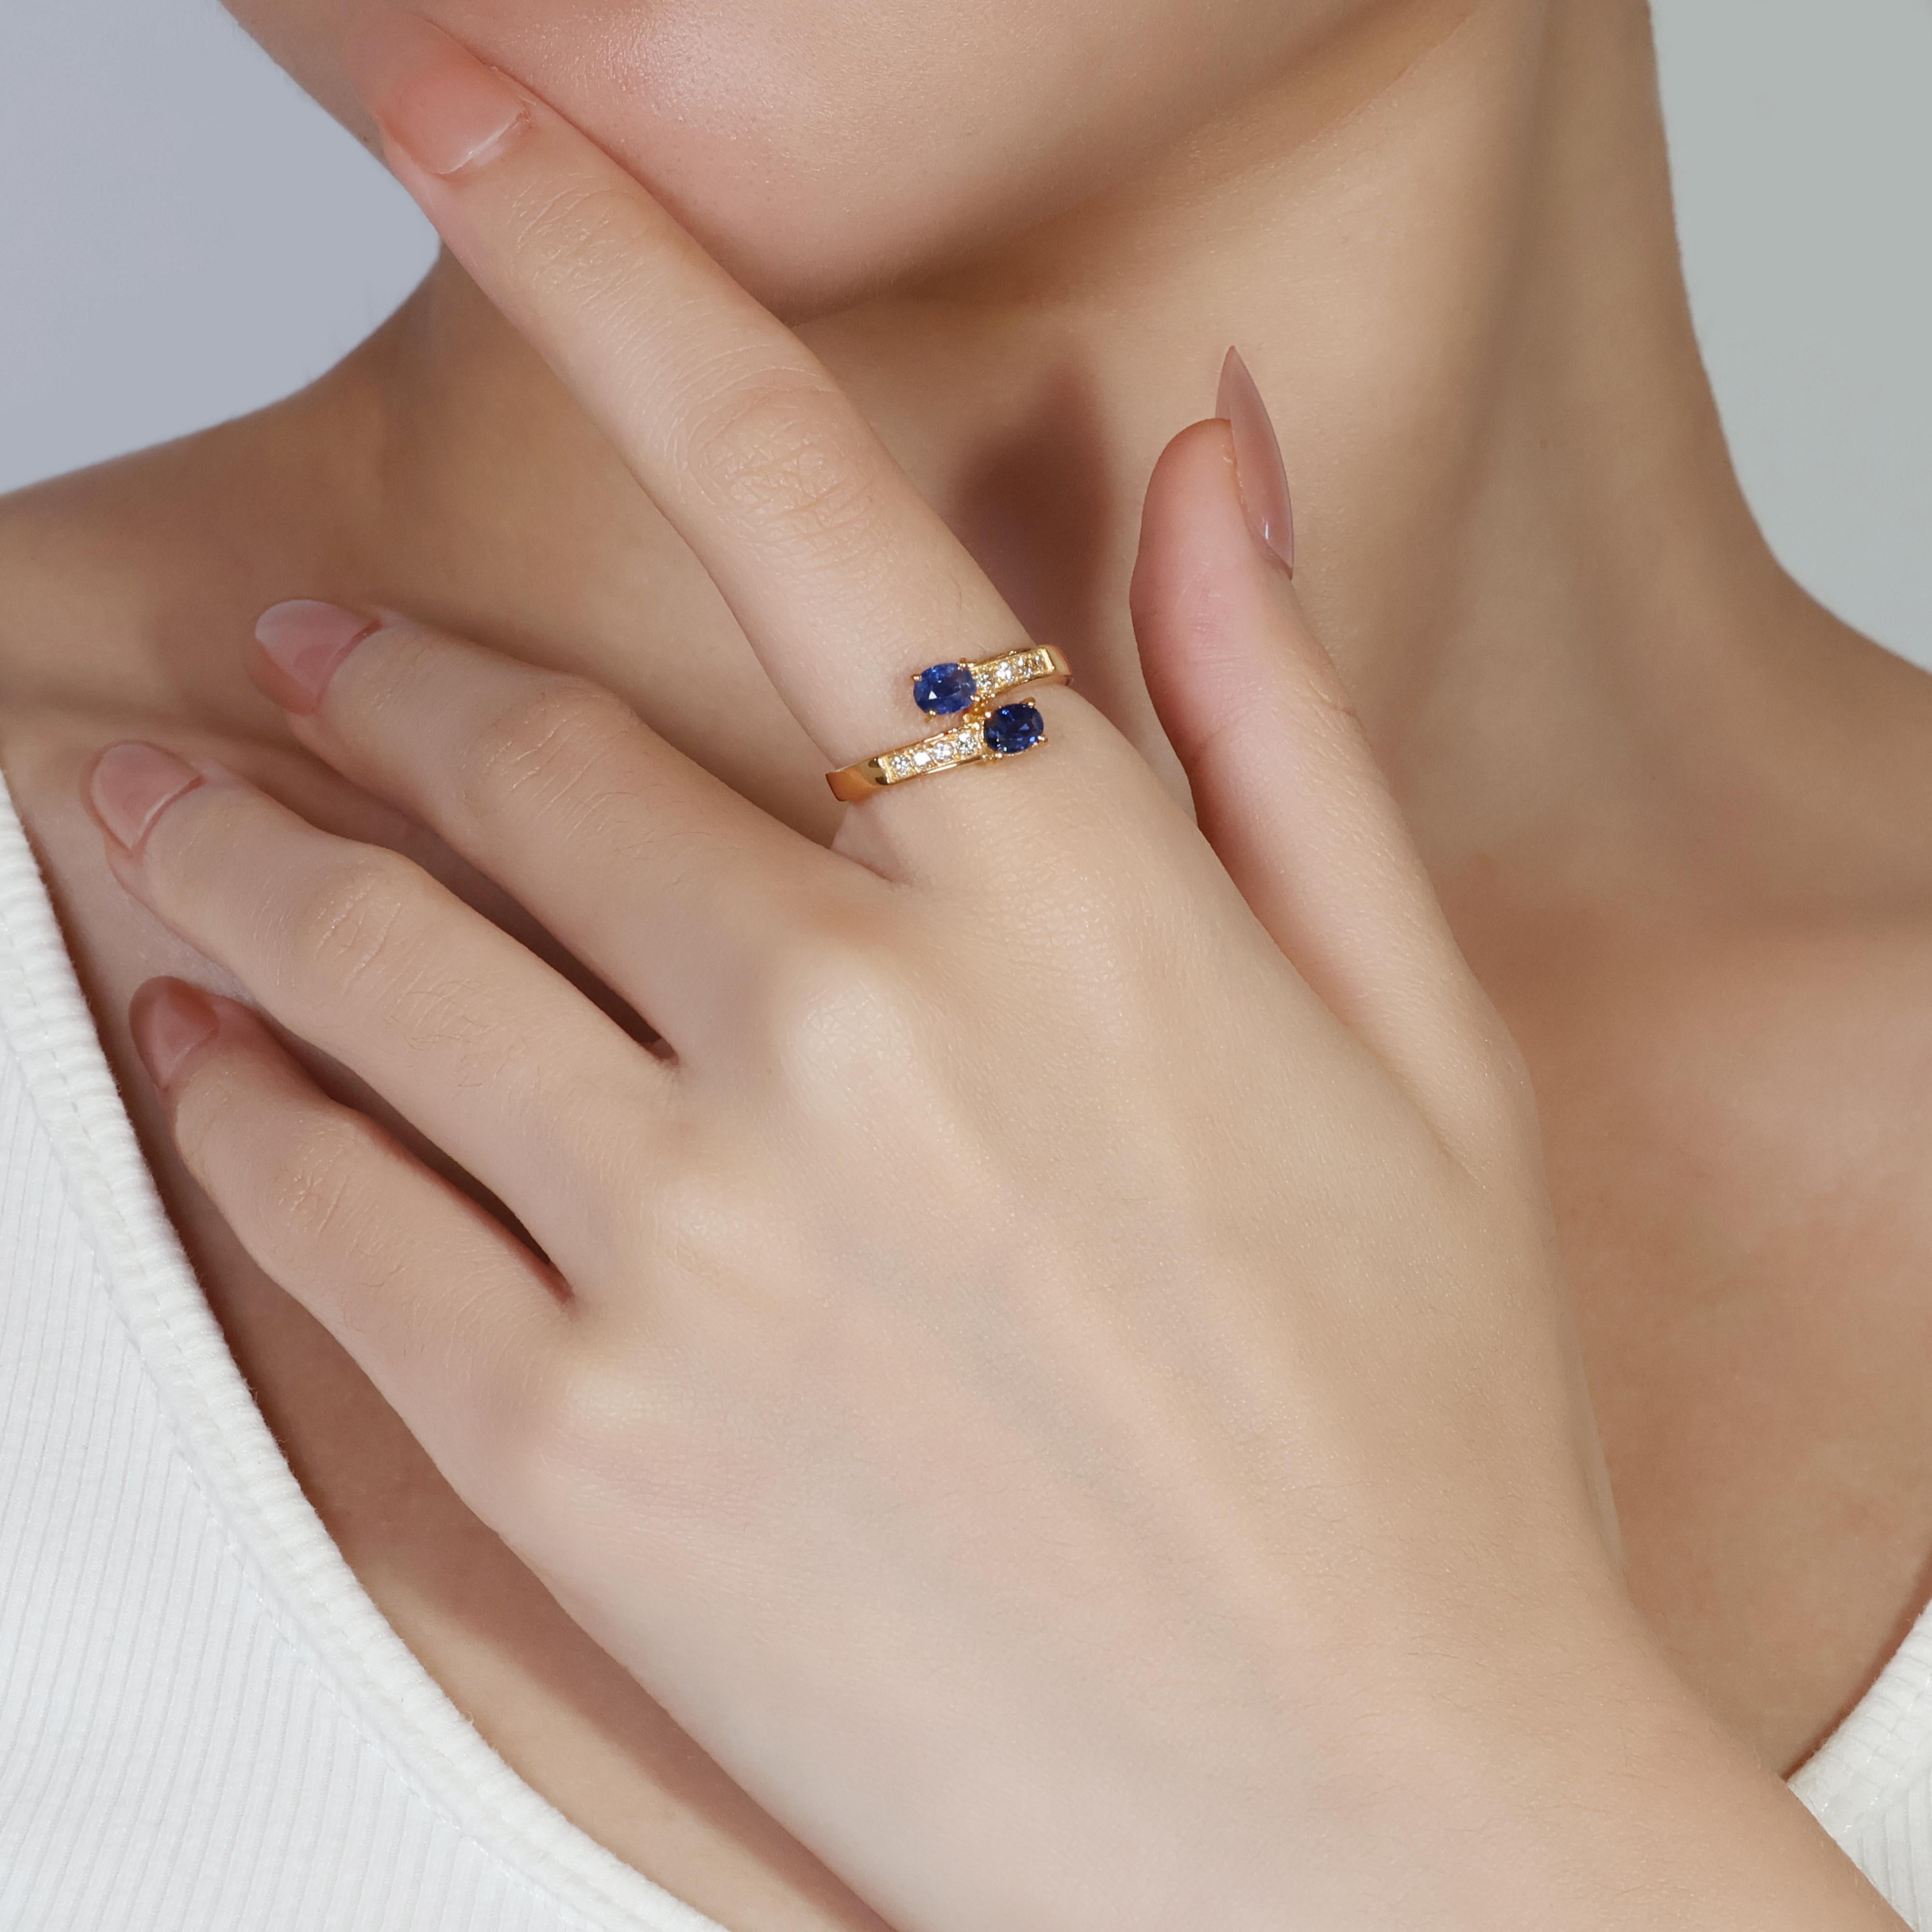 Presenting a stunning 20k yellow gold ring, showcases two captivating cushion-modified sapphires boasting a combined weight of 0.48 carats.  Complementing the sapphires are eight sparkling round brilliant cut diamonds totaling 0.12 carats, each